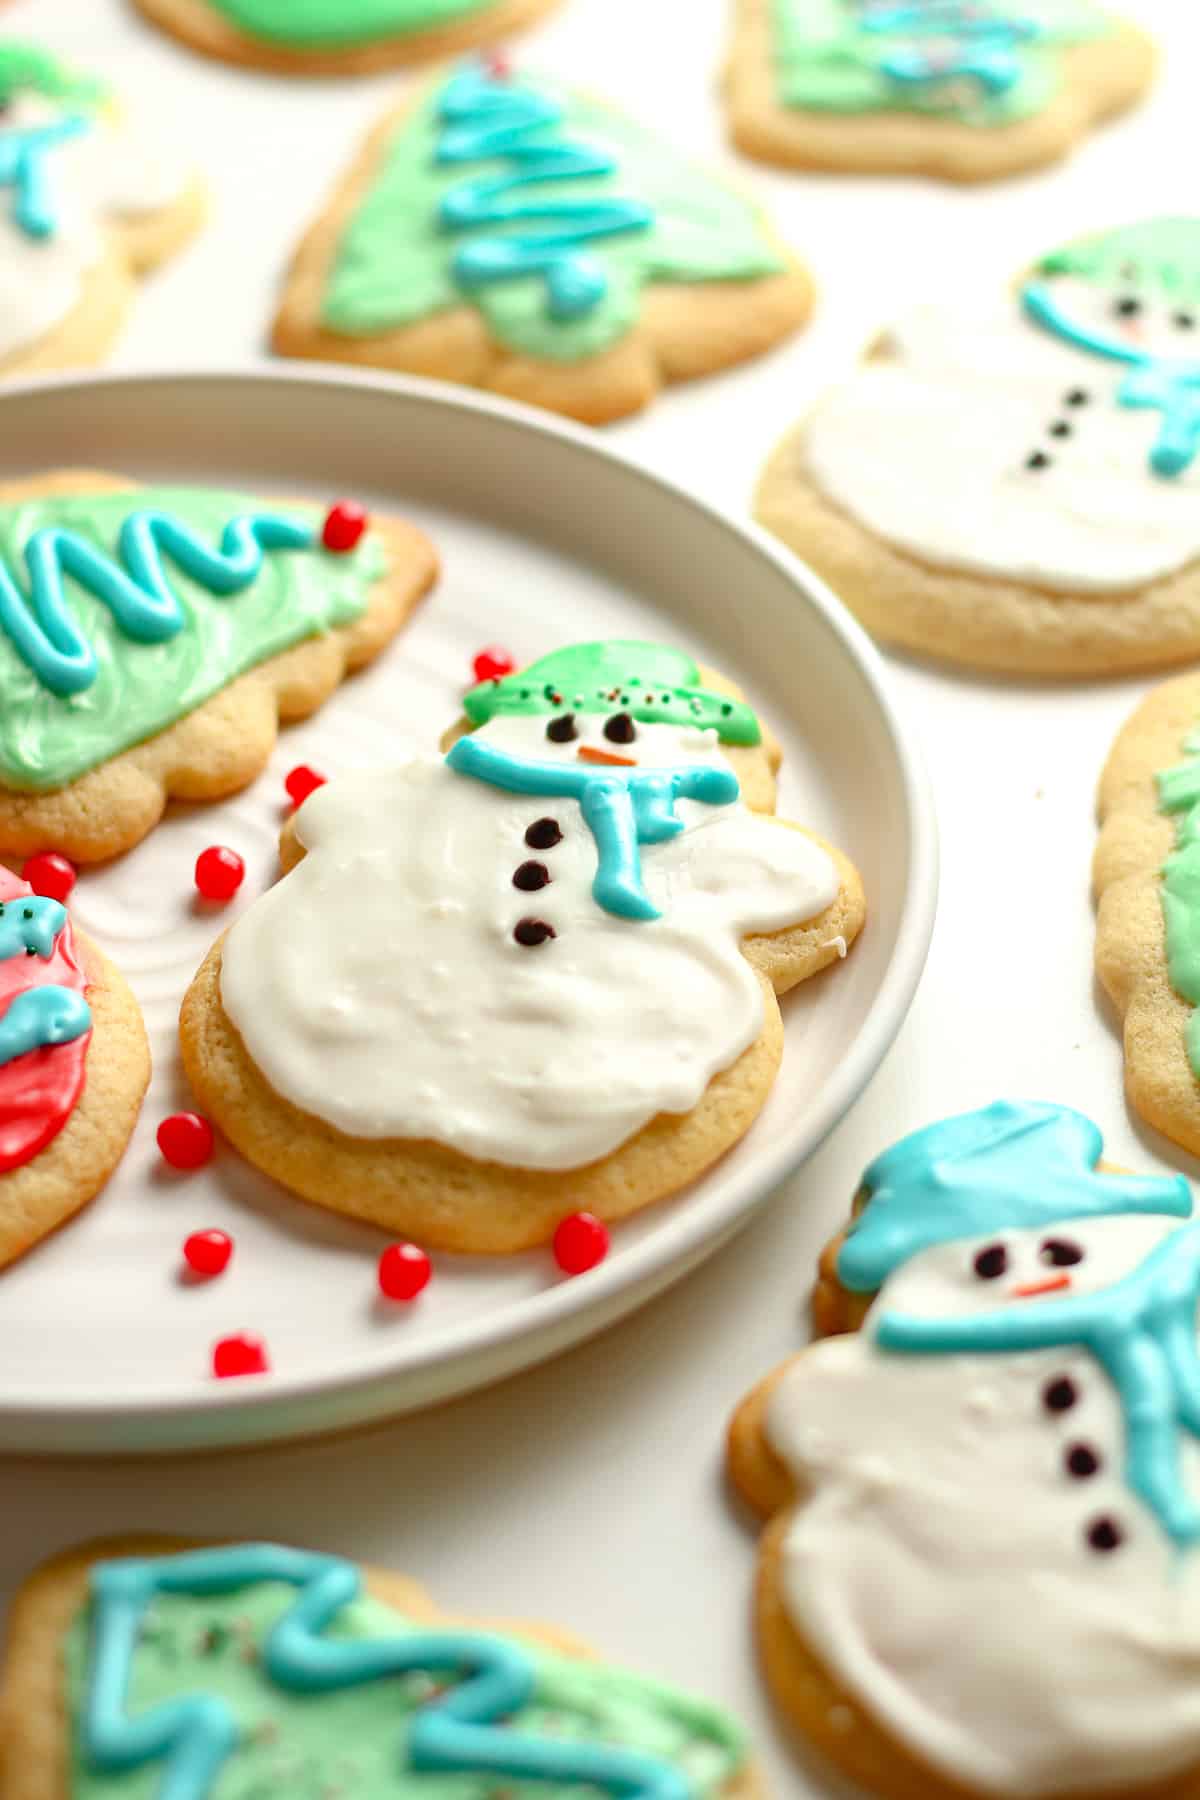 Side shot of the snowman sugar cookie with other cookies around it.